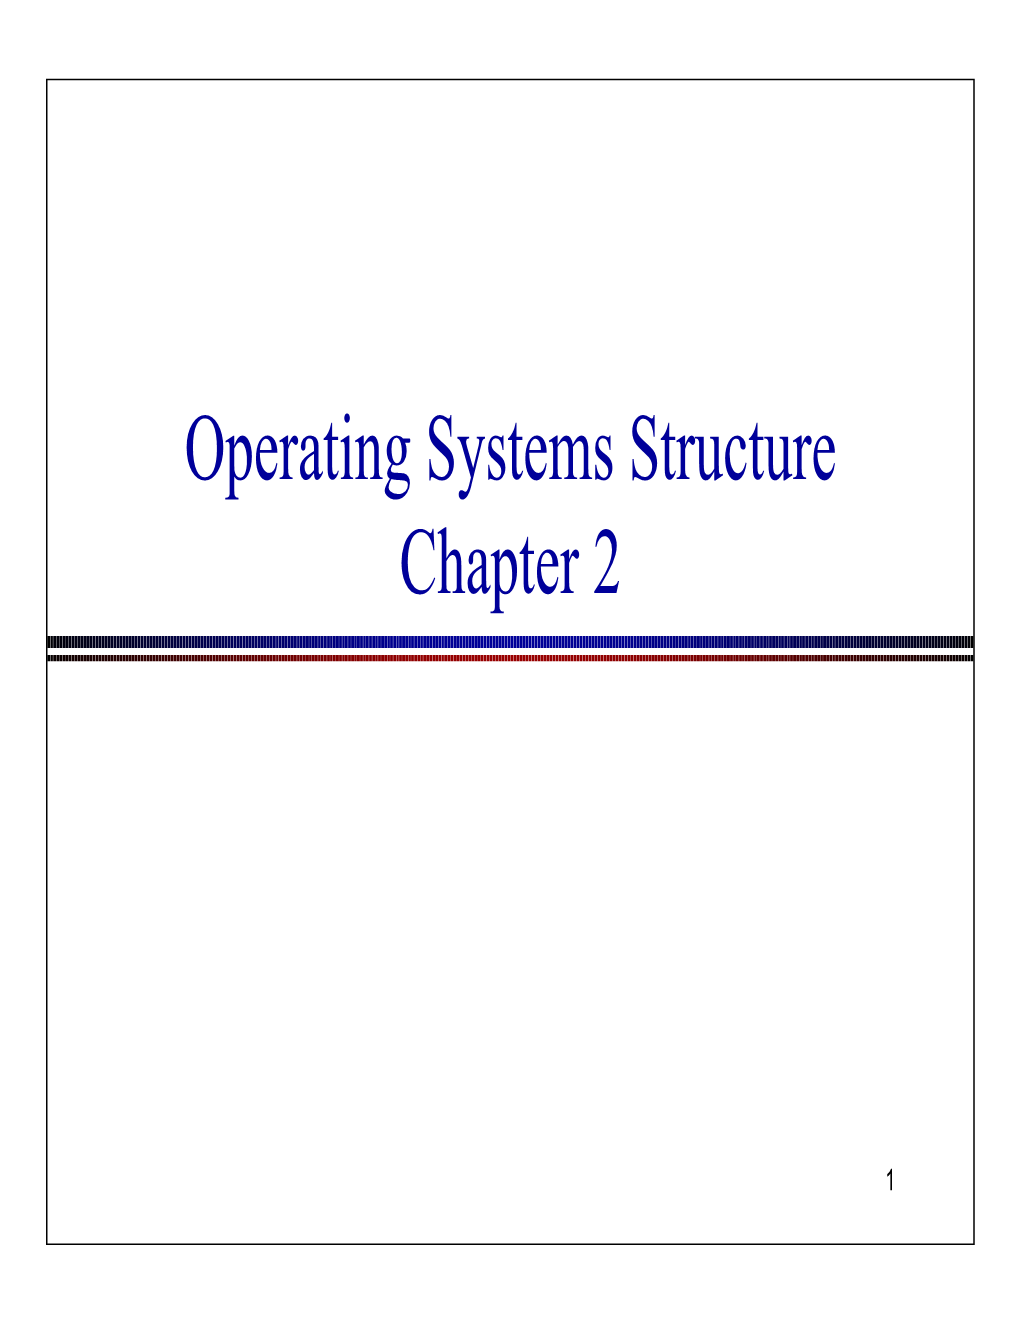 Operating Systems Structure Chapter 2